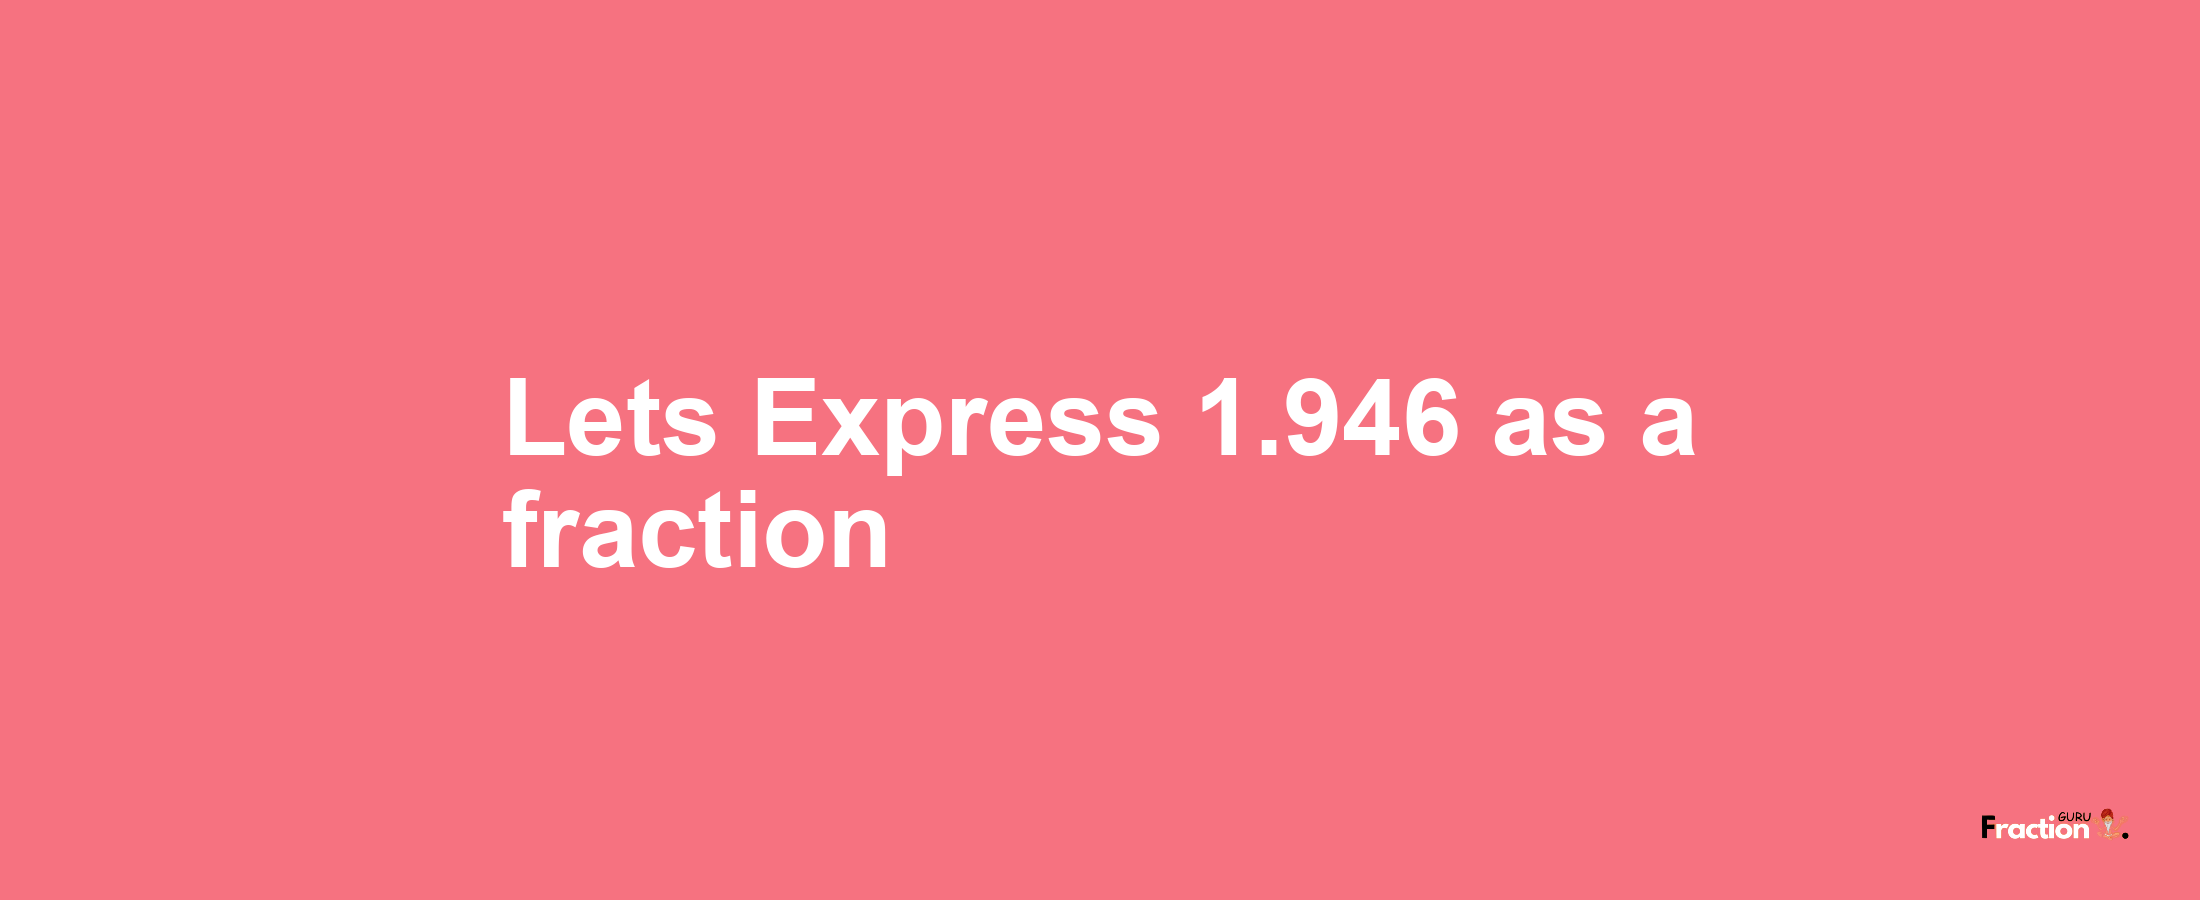 Lets Express 1.946 as afraction